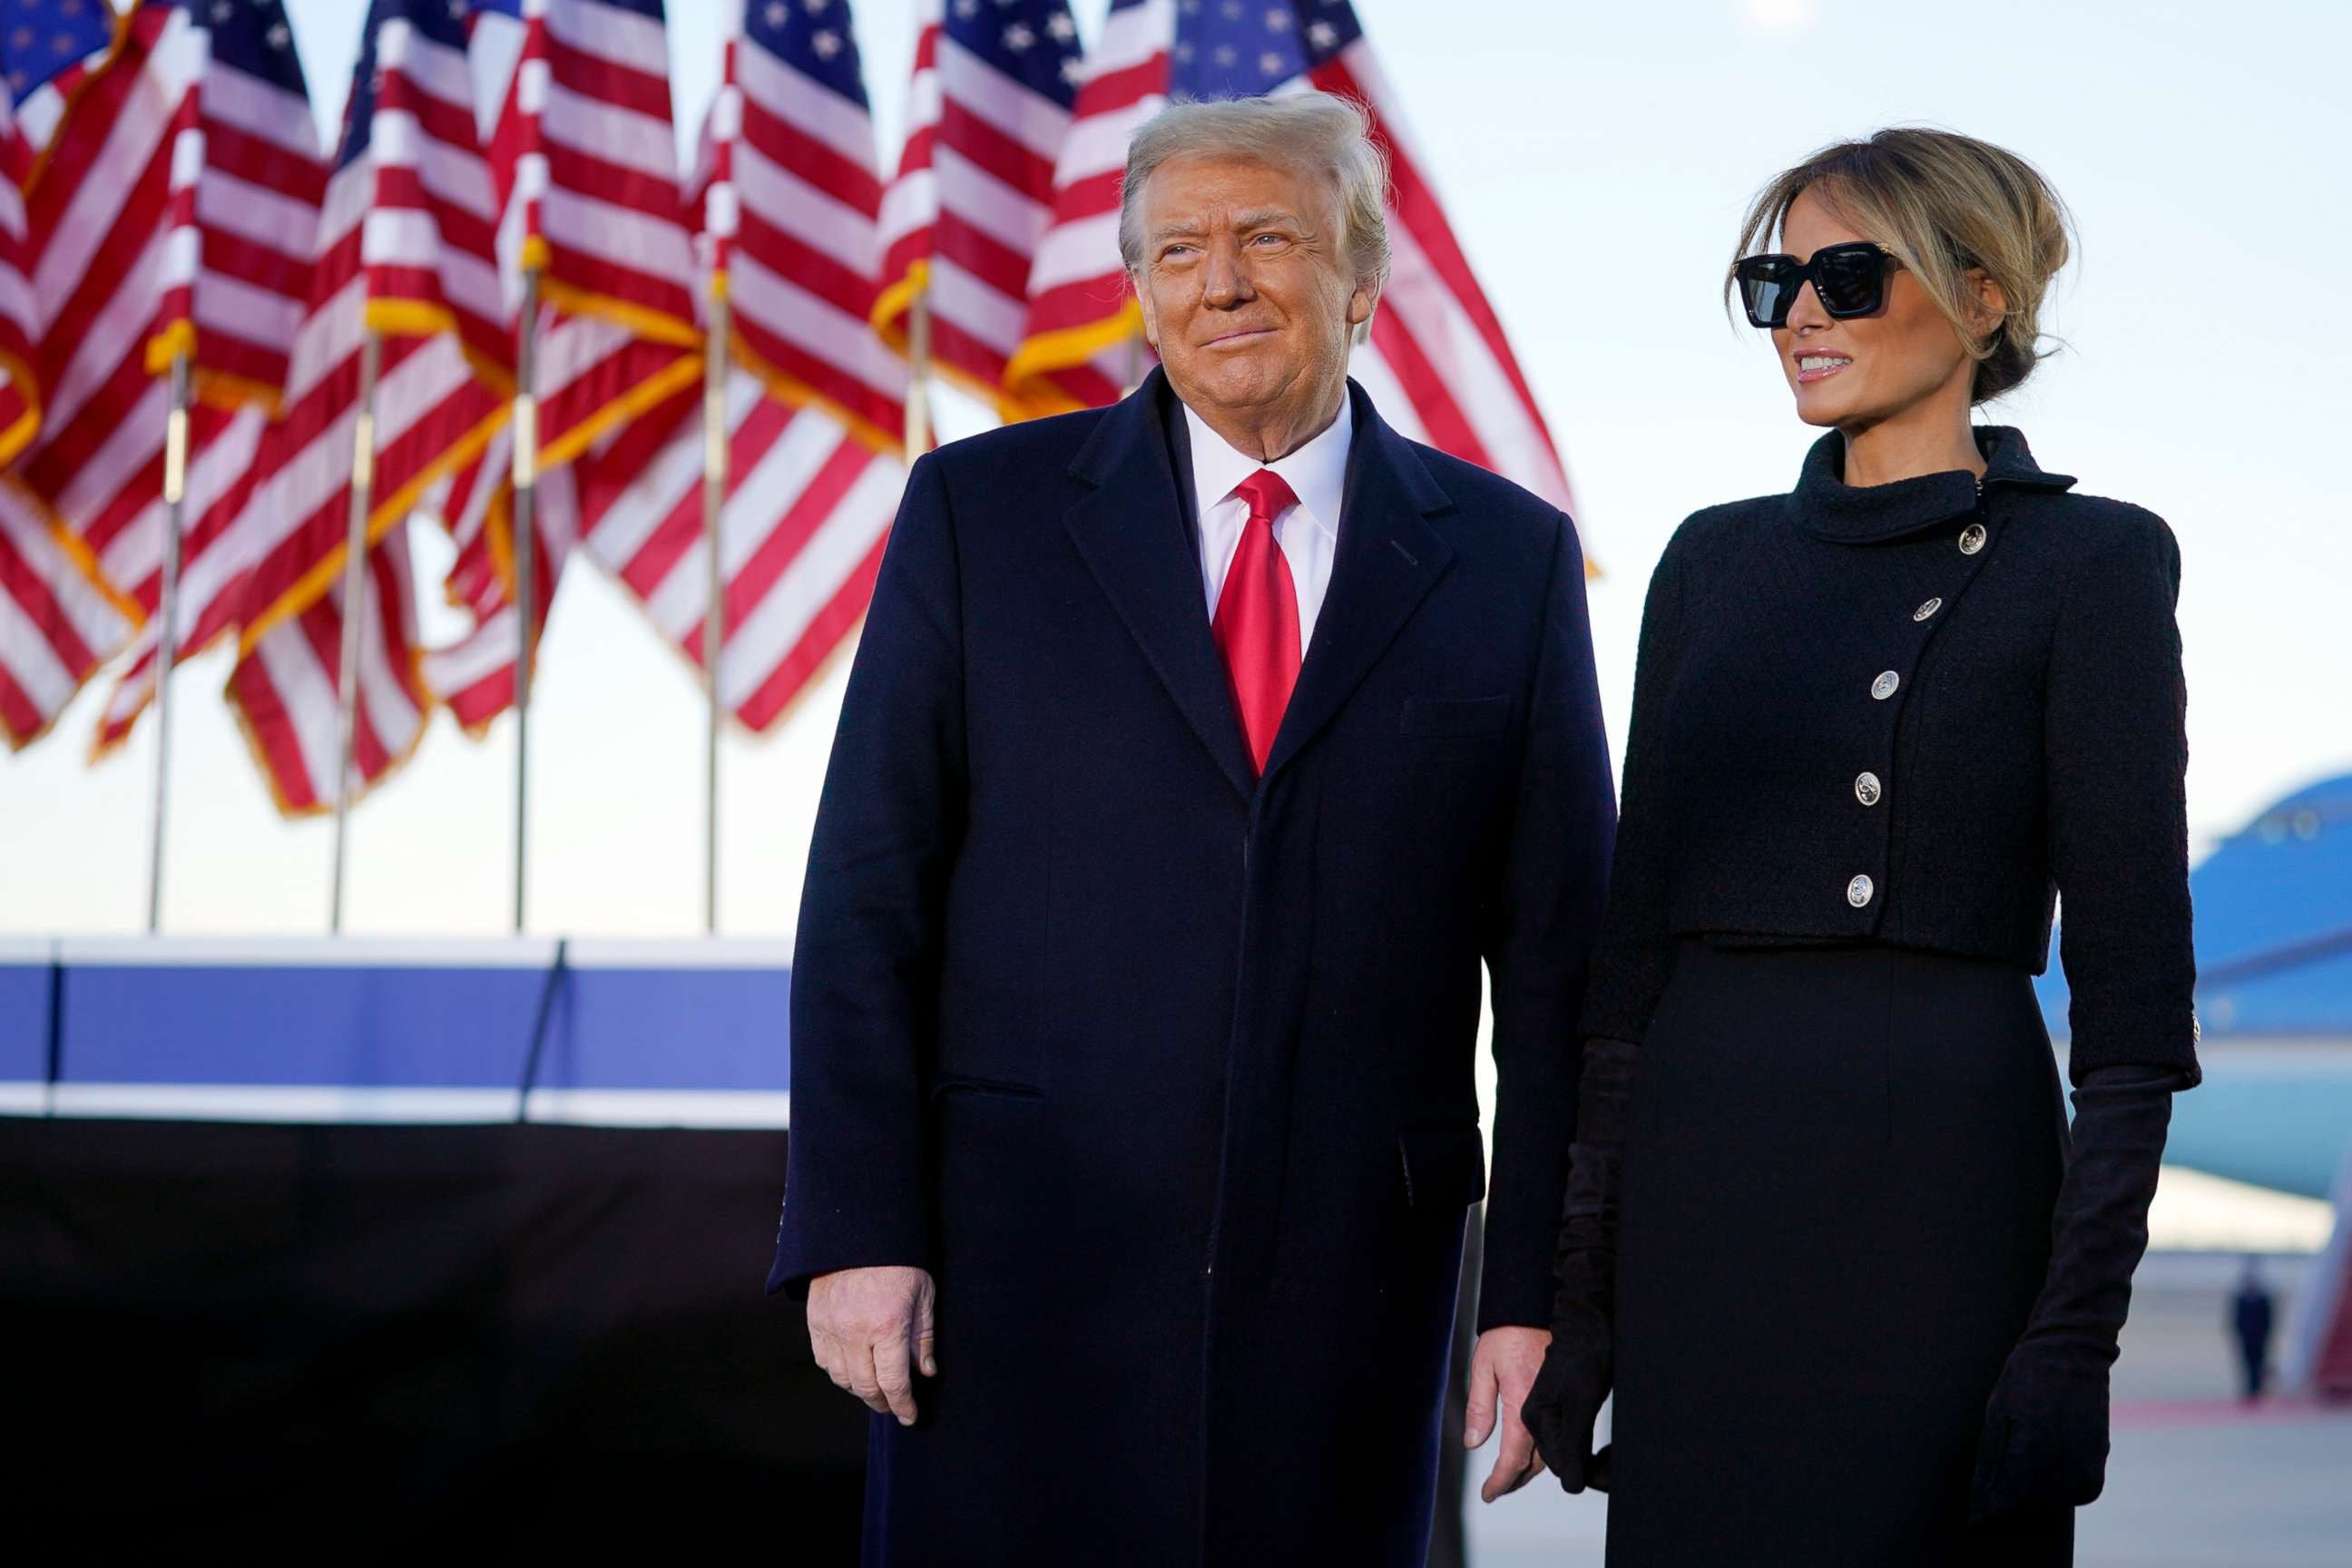 PHOTO: President Donald Trump and first lady Melania Trump look at supporters before boarding Air Force One at Andrews Air Force Base, Md., Jan. 20, 2021.